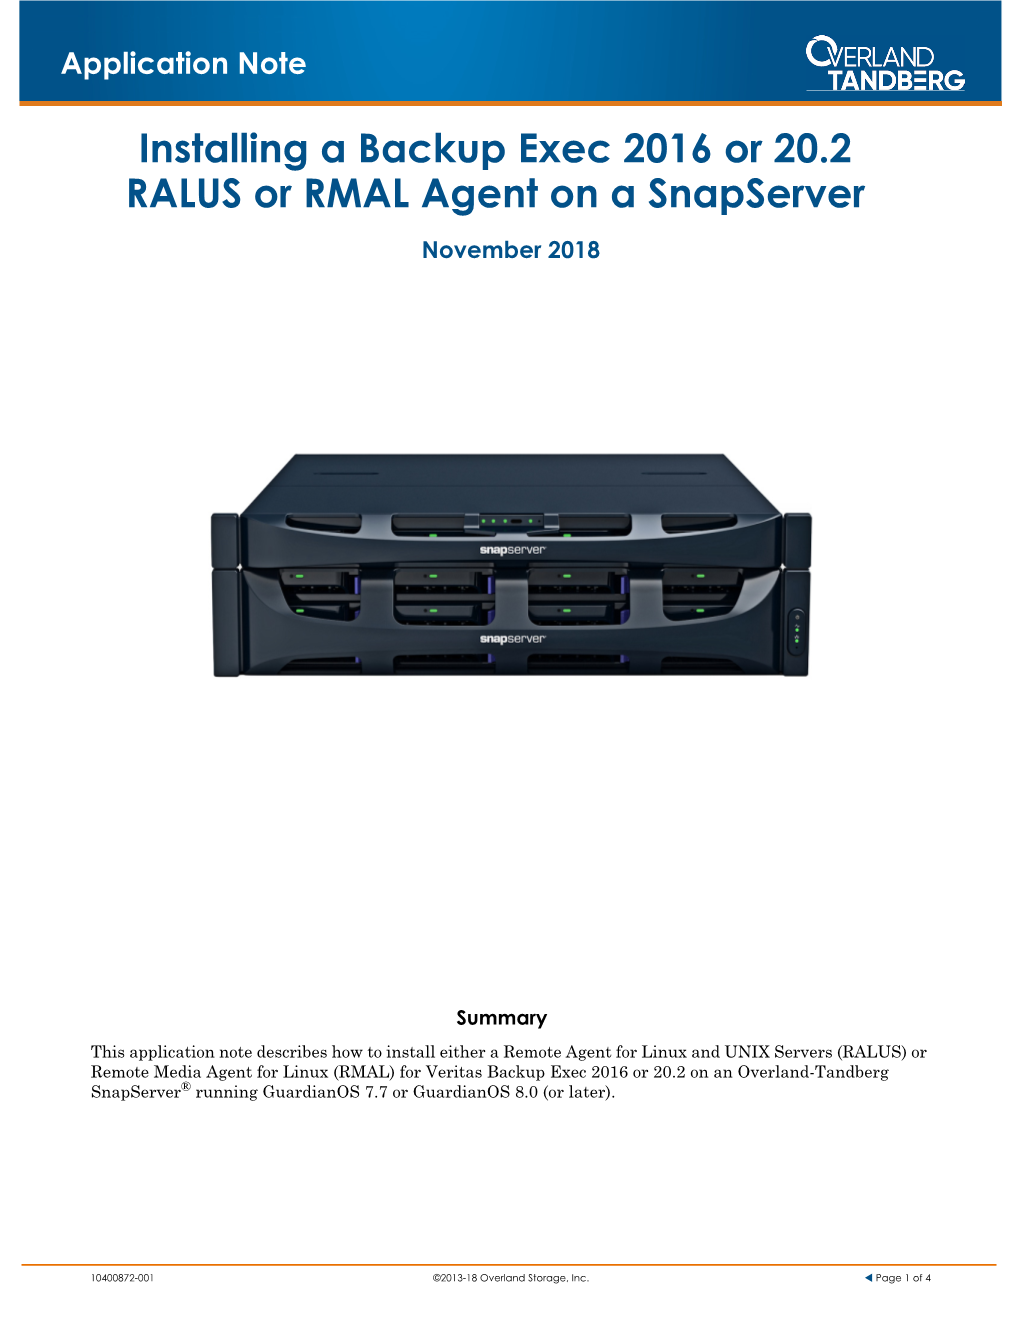 Installing a Backup Exec 2016 Or 20.2 RALUS Or RMAL Agent on a Snapserver